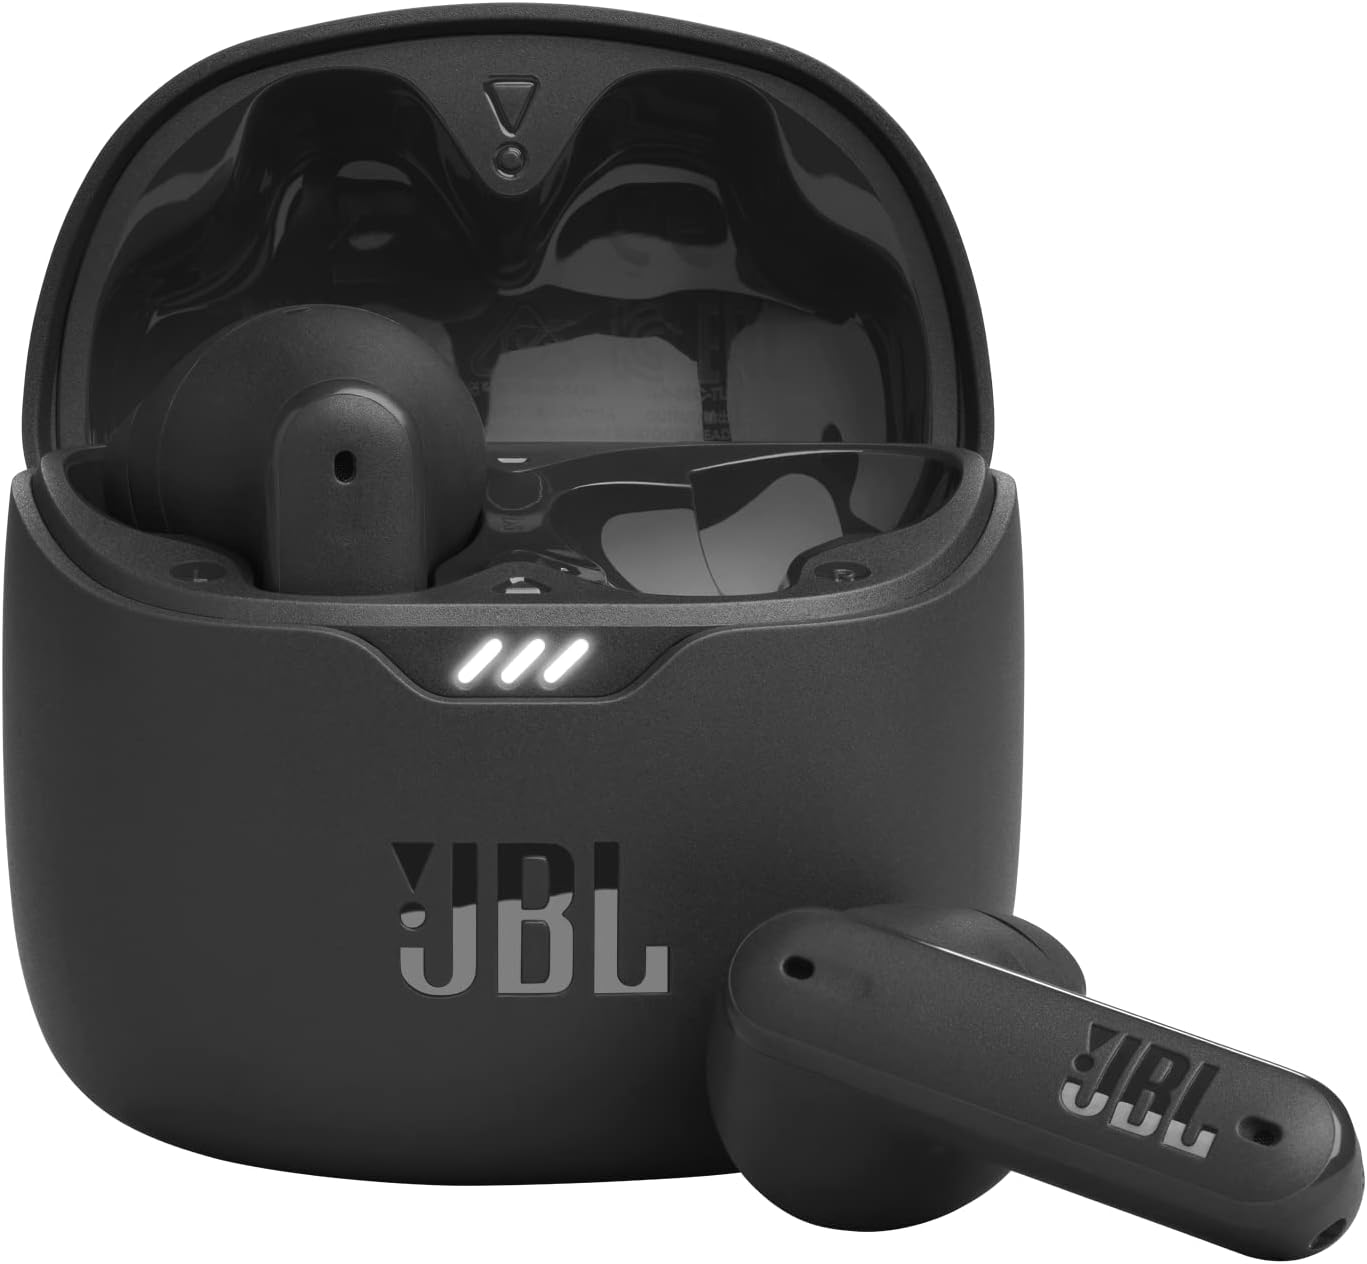 JBL Tune Flex Earbuds Review: Deliver Impressive Sound Quality and Battery Life